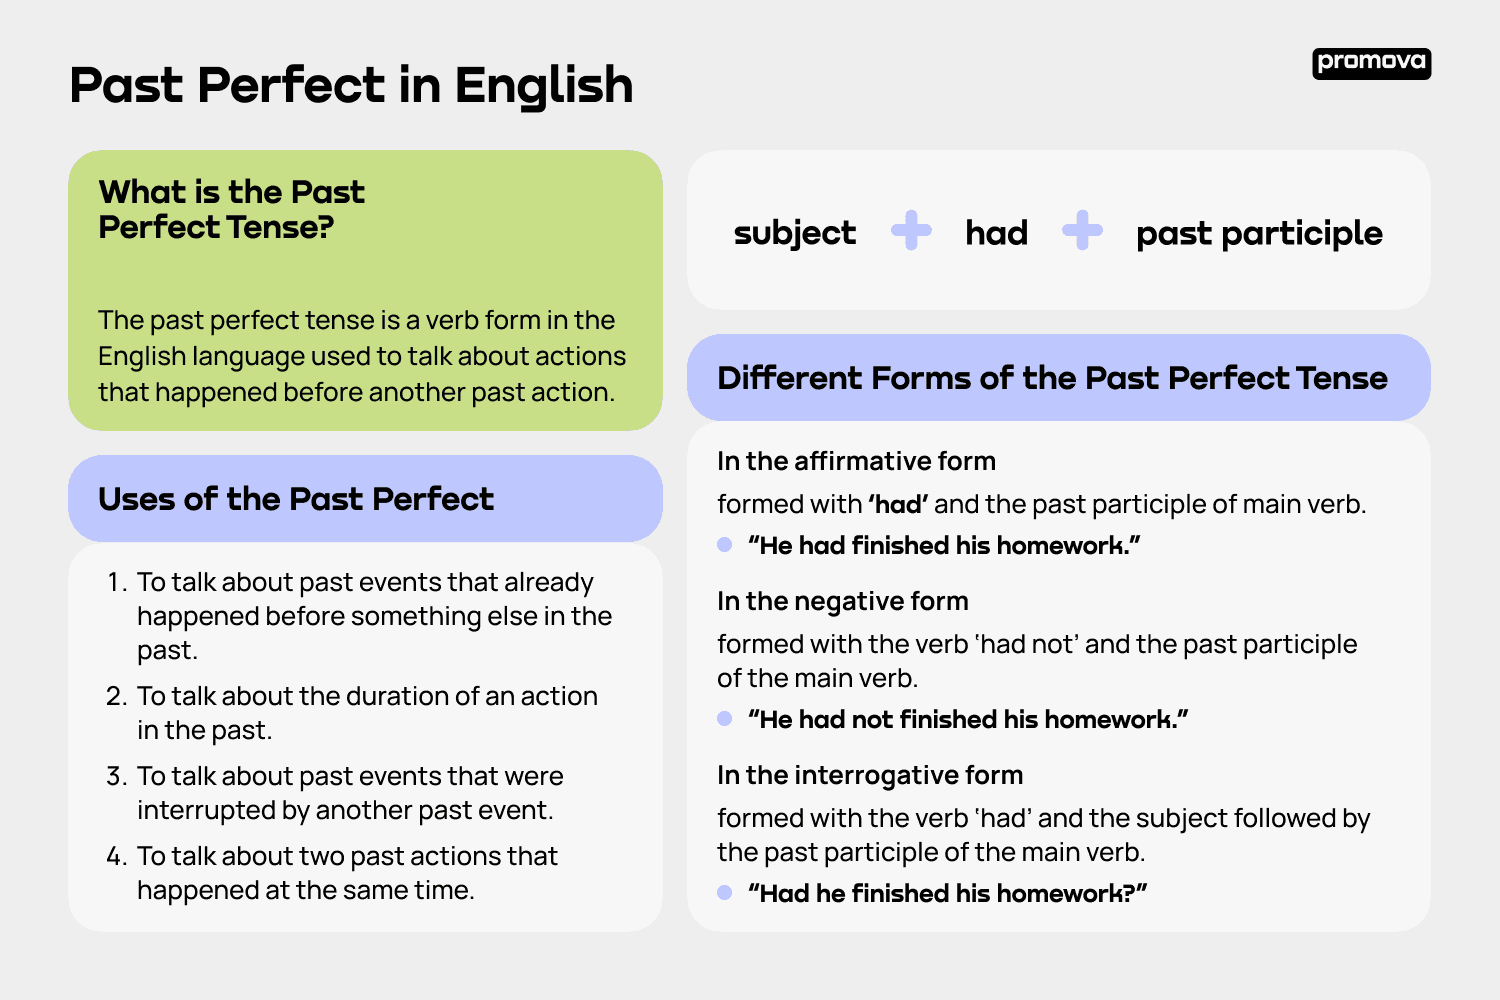 Past Perfect in English